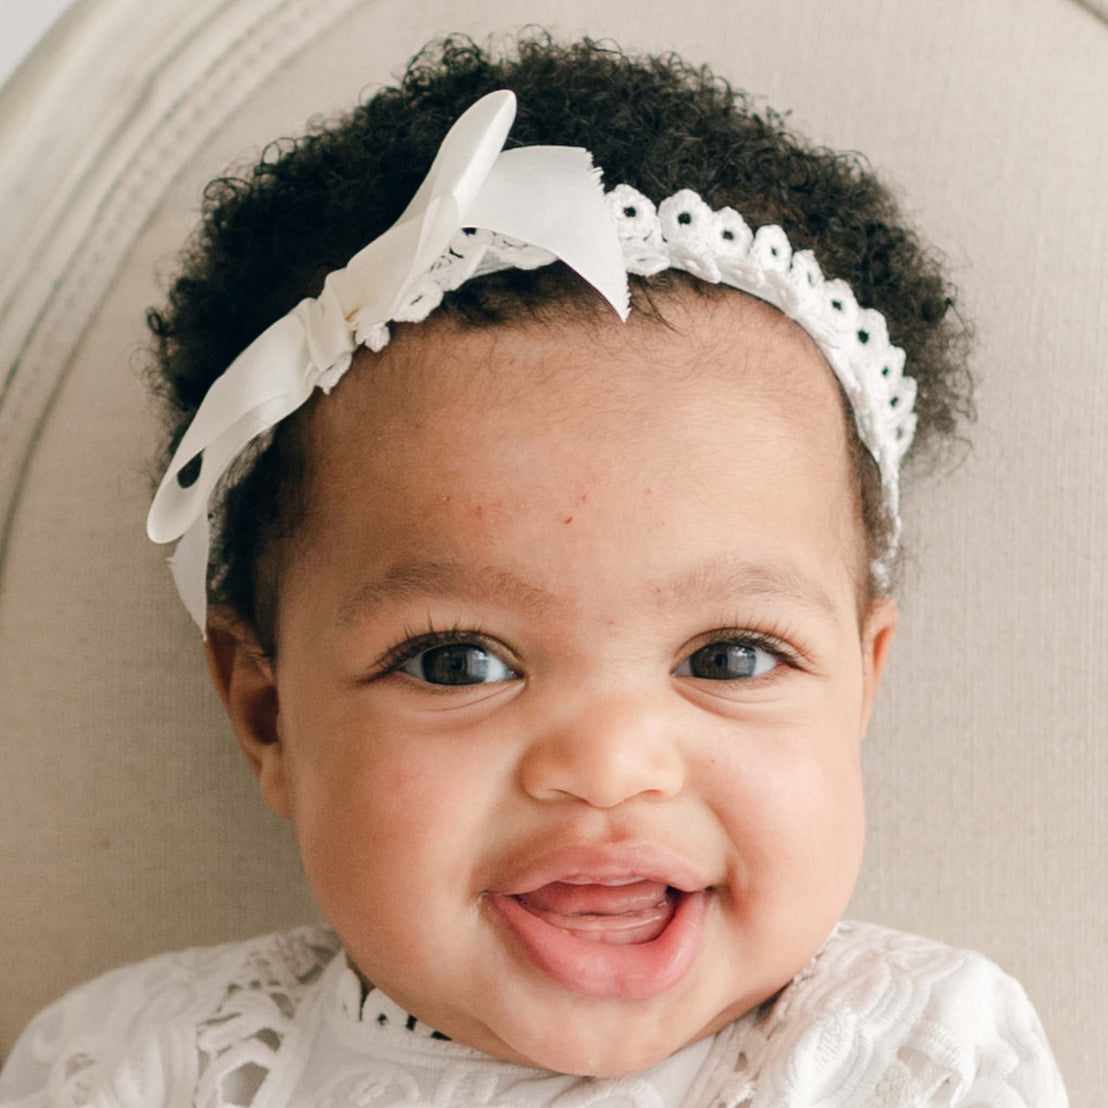 A smiling baby with curly hair wears the Adeline Headband, a white, lace-trimmed accessory featuring a silk ribbon bow. The baby is dressed in a white christening outfit and is seated against a light-colored cushion. The close-up captures the baby's cheerful expression and wide eyes.